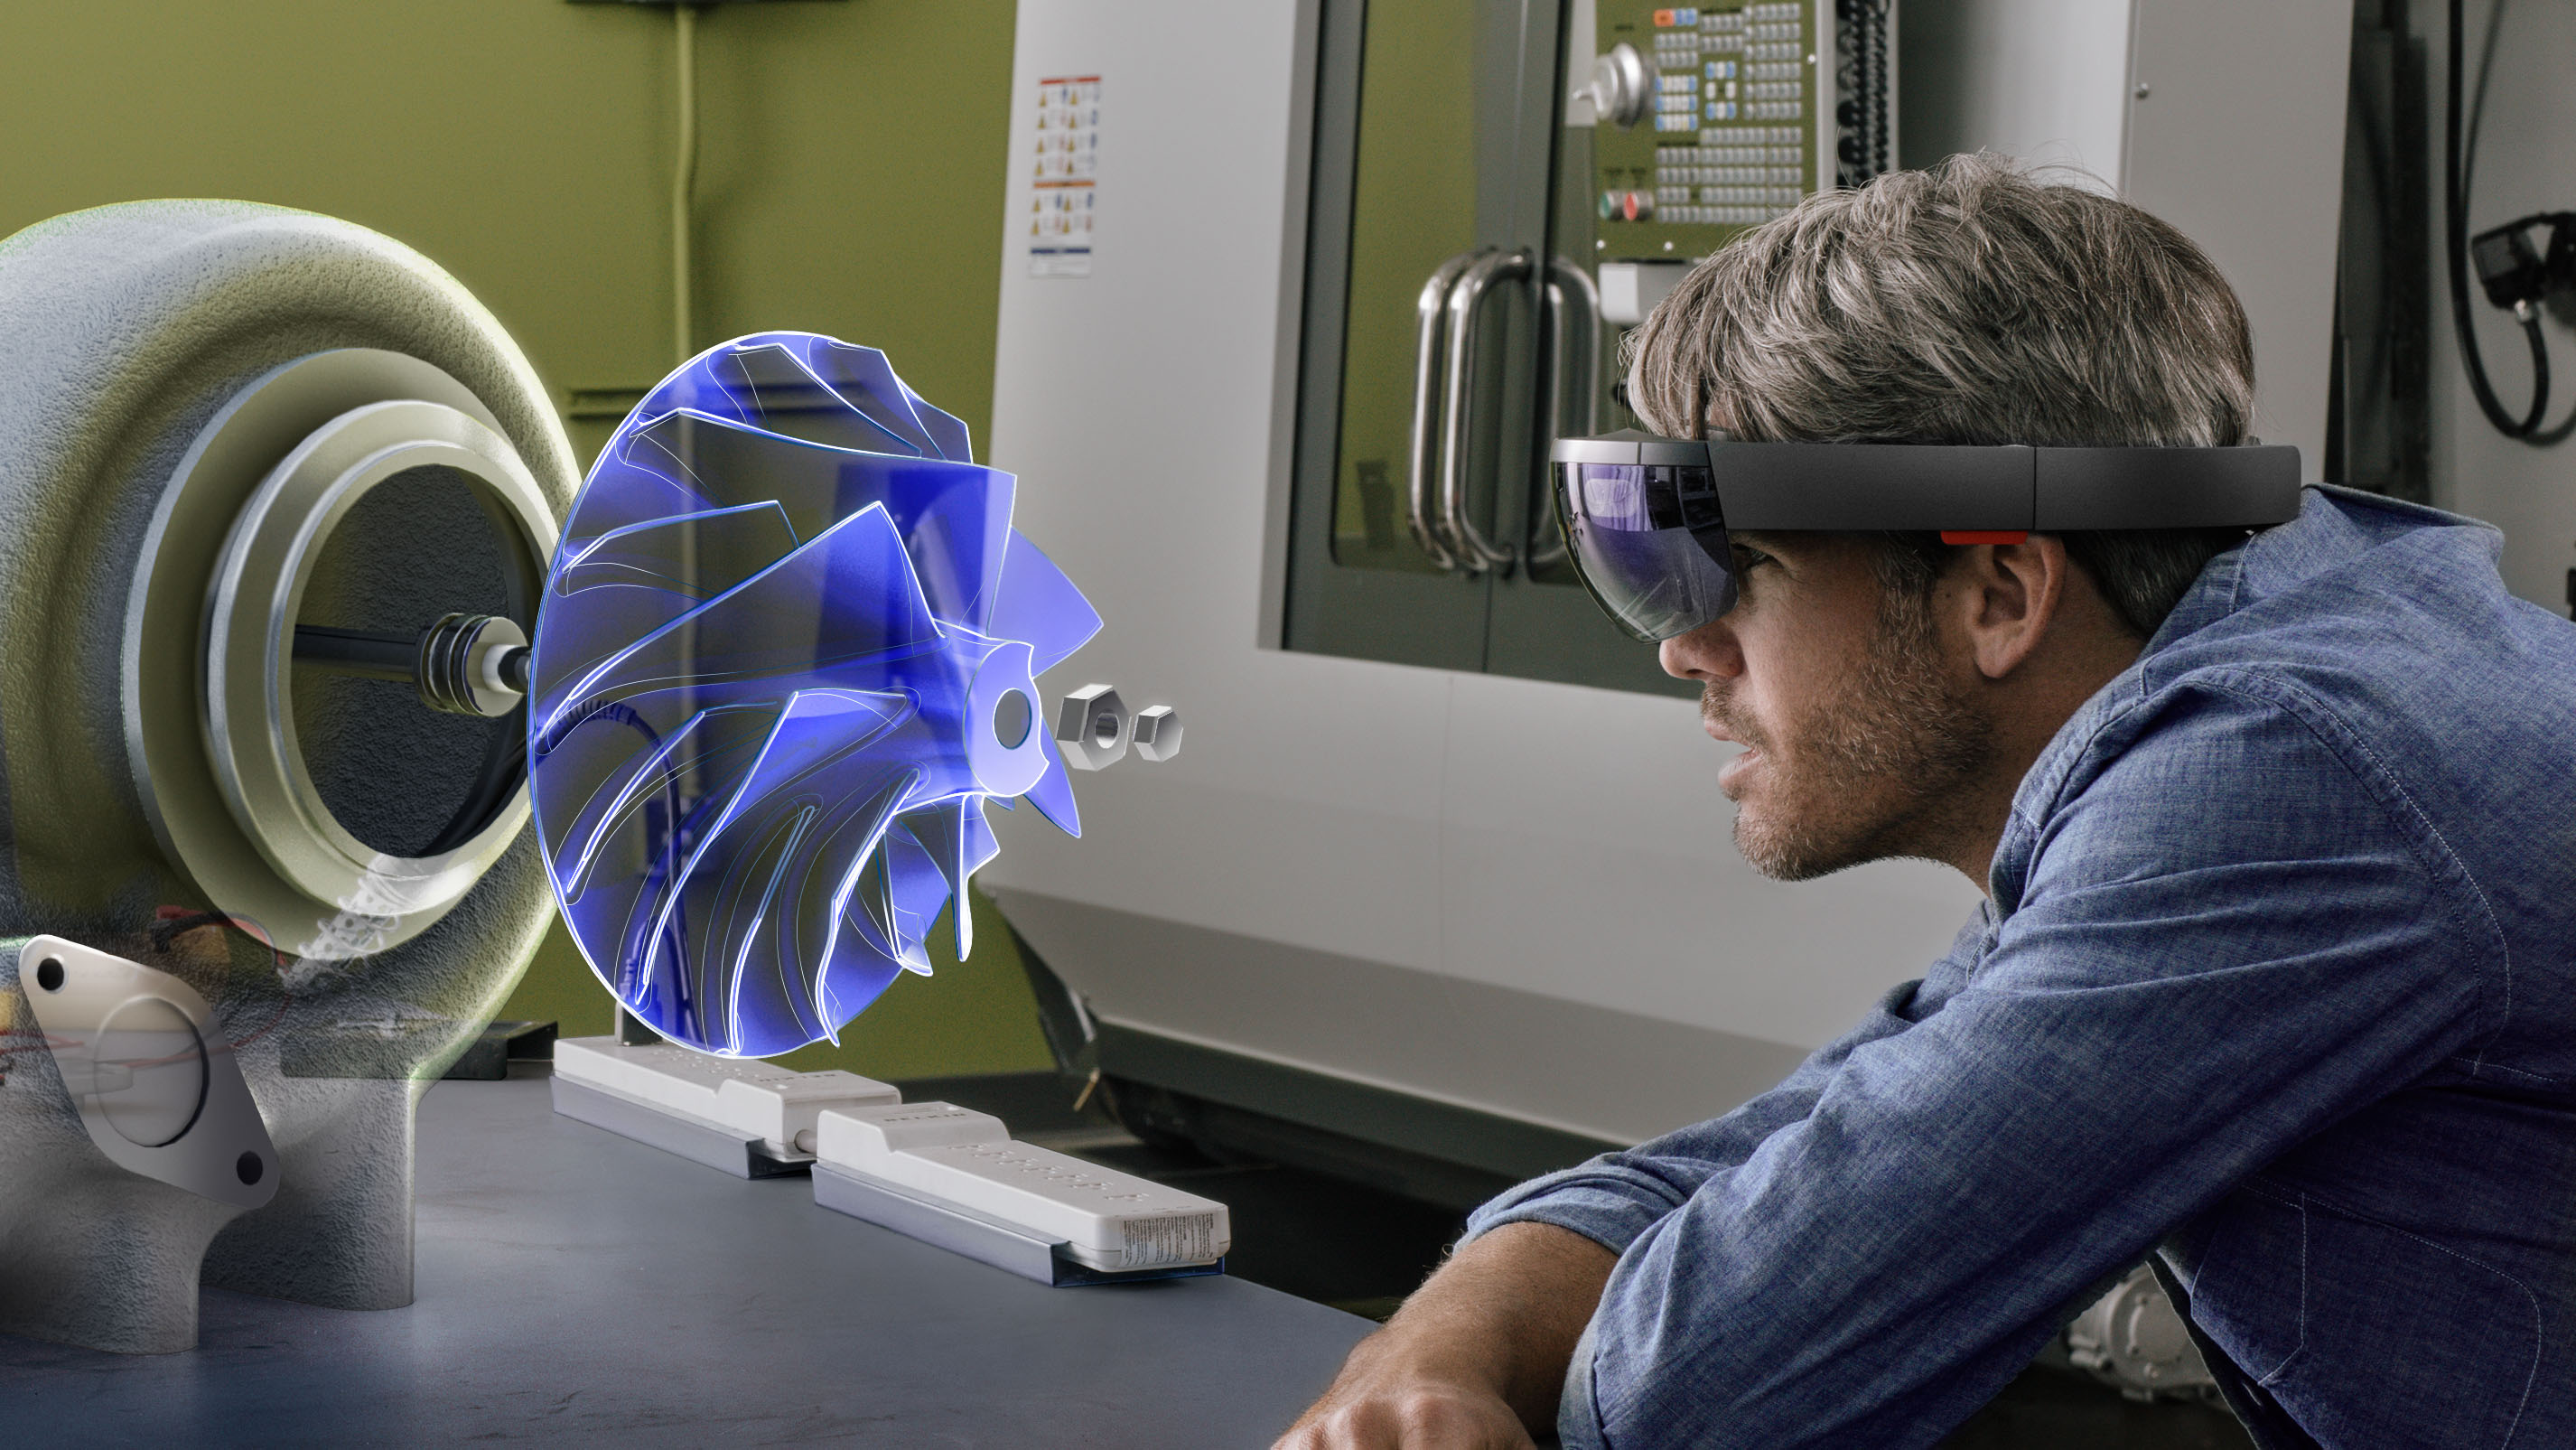 Don't expect Xbox and HoloLens compatibility just yet.